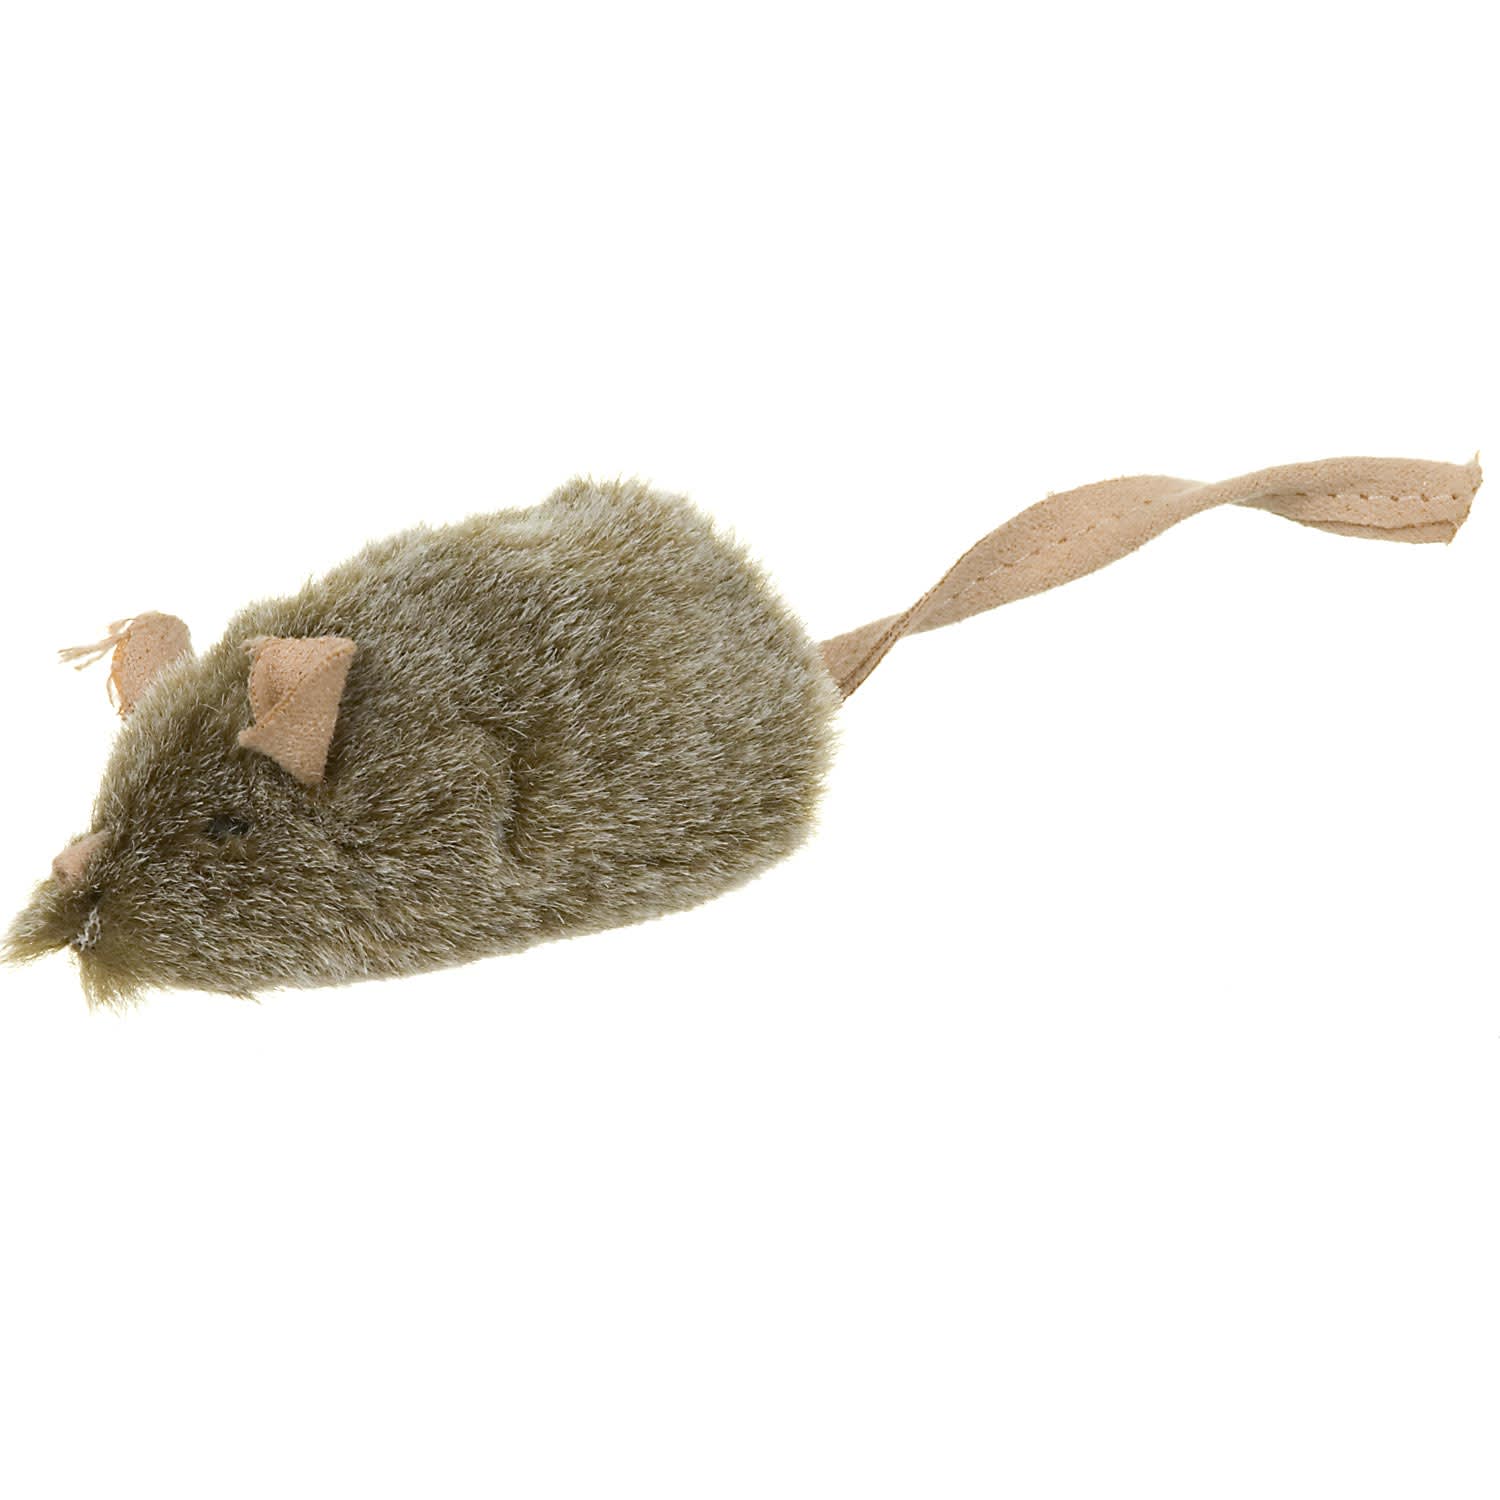 chirping mouse cat toy